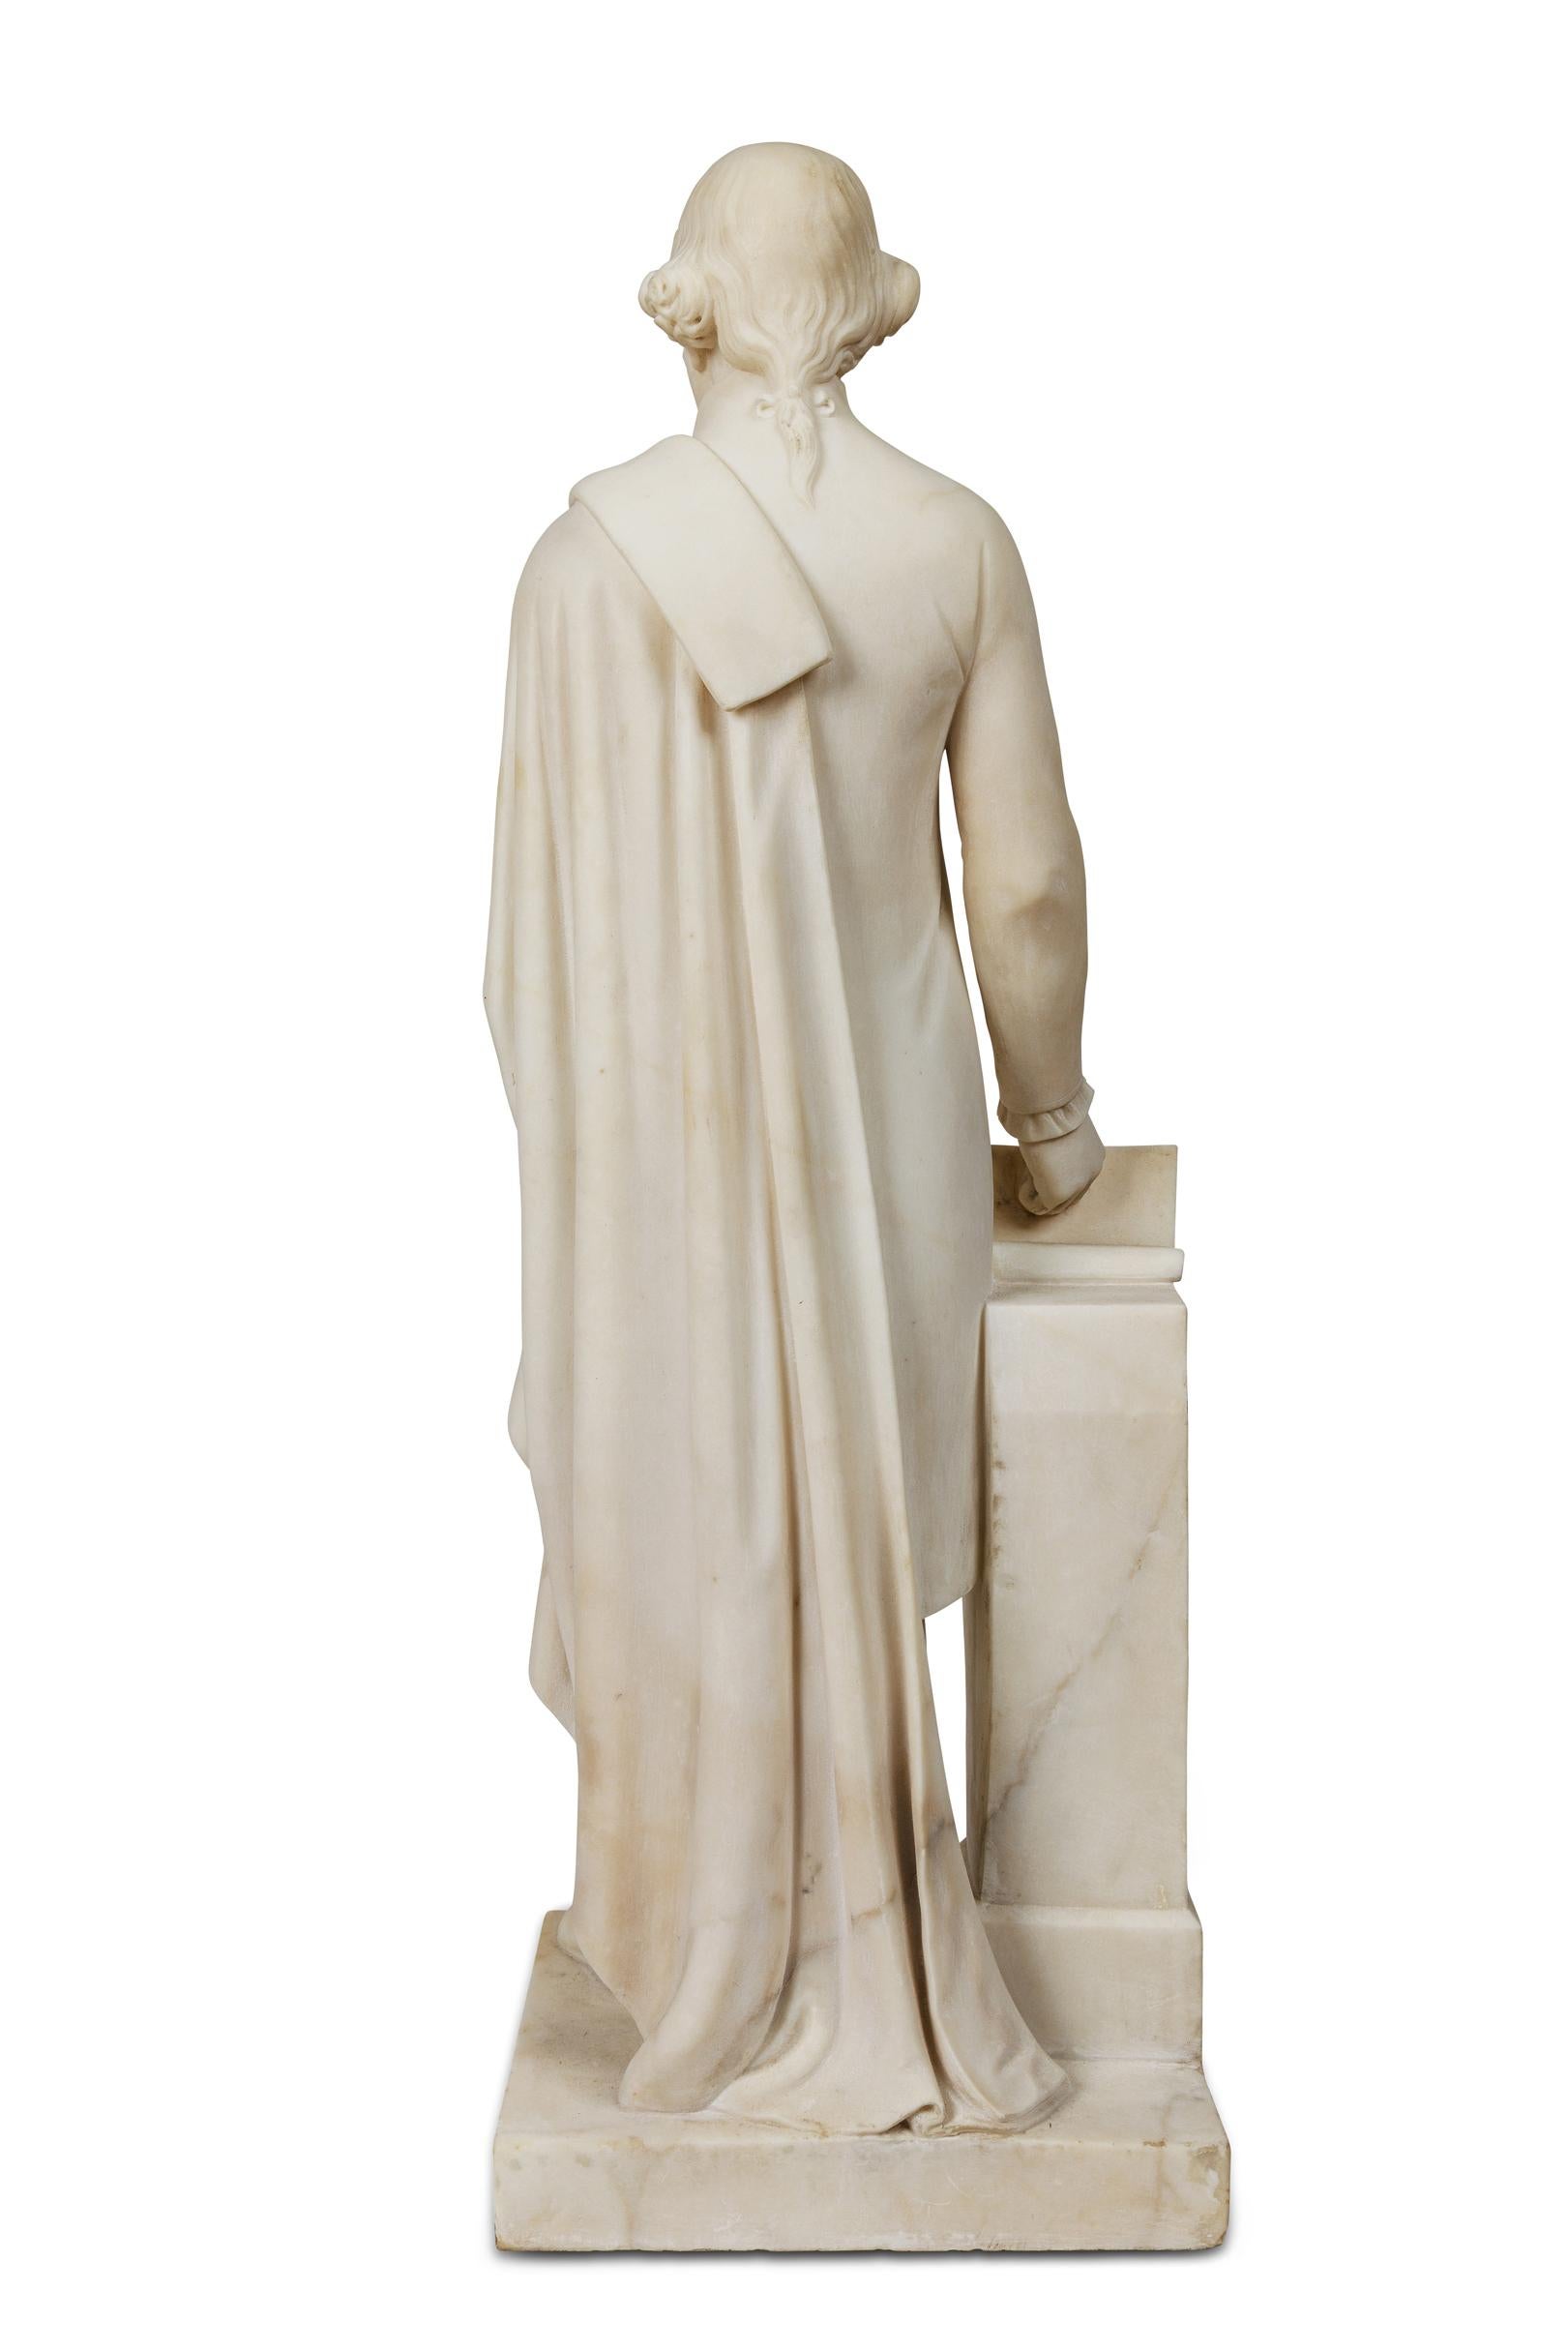 A Rare and Important American Marble Sculpture of Thomas Jefferson, Circa 1870 For Sale 5